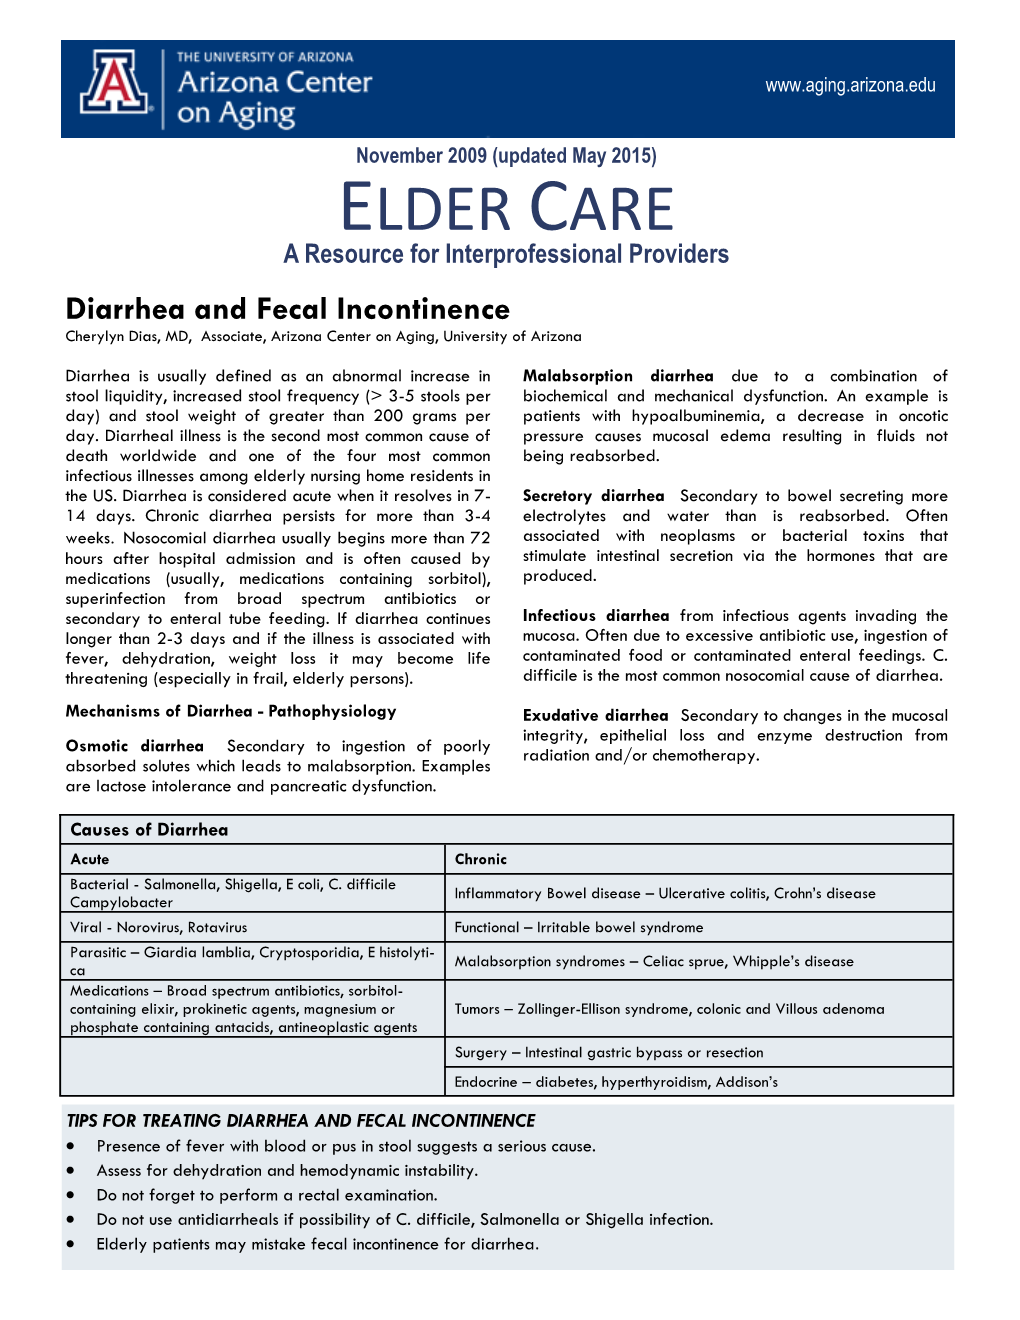 ELDER CARE a Resource for Interprofessional Providers Diarrhea and Fecal Incontinence Cherylyn Dias, MD, Associate, Arizona Center on Aging, University of Arizona